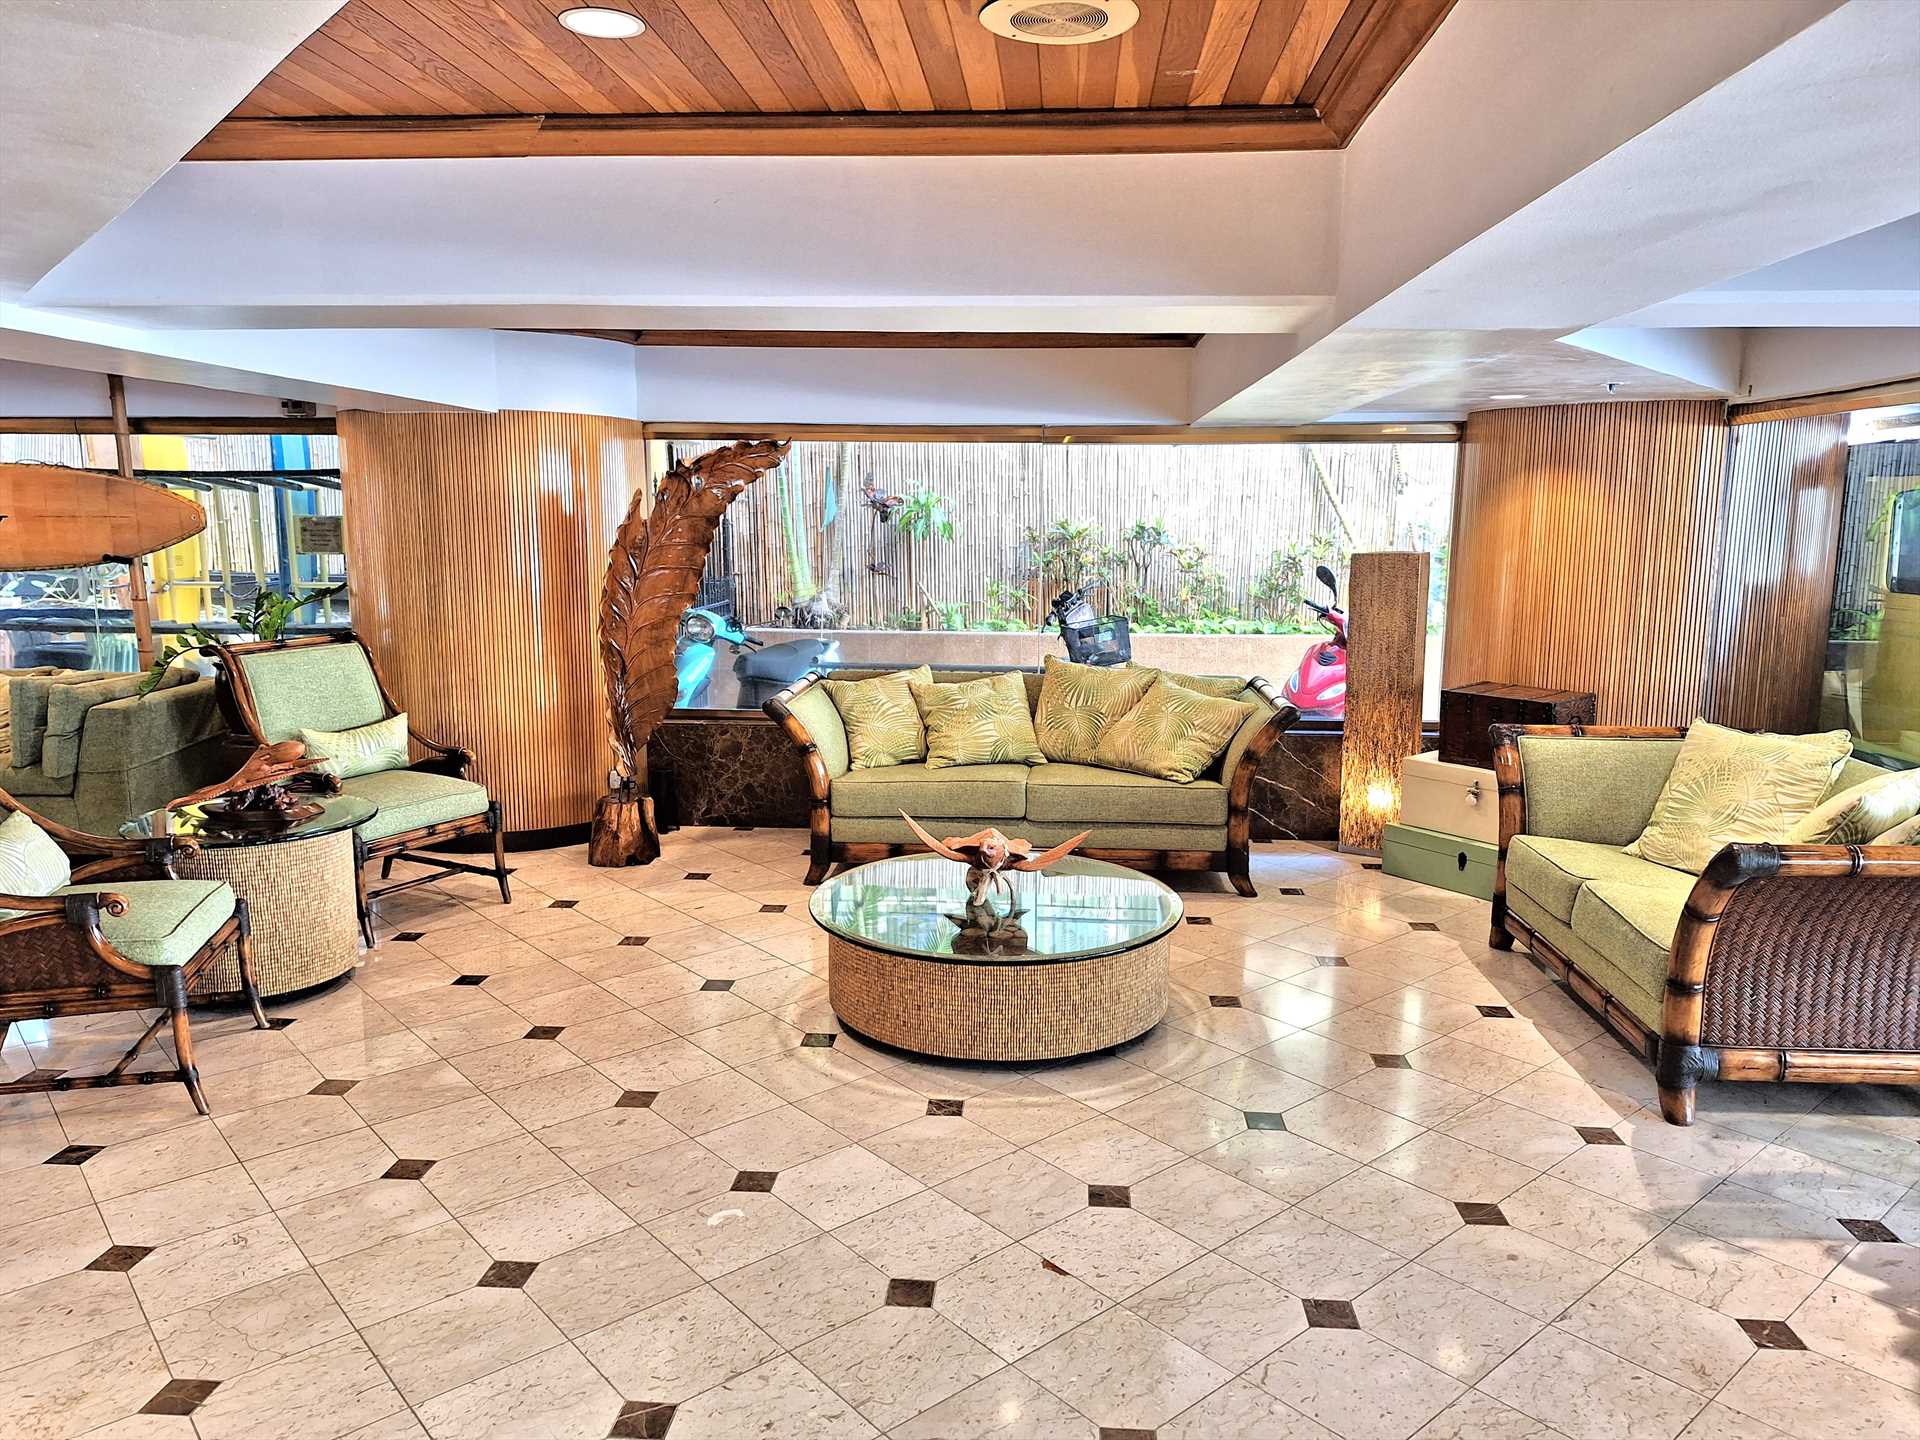 The lobby is elegant, spacious and inviting with a tropical 